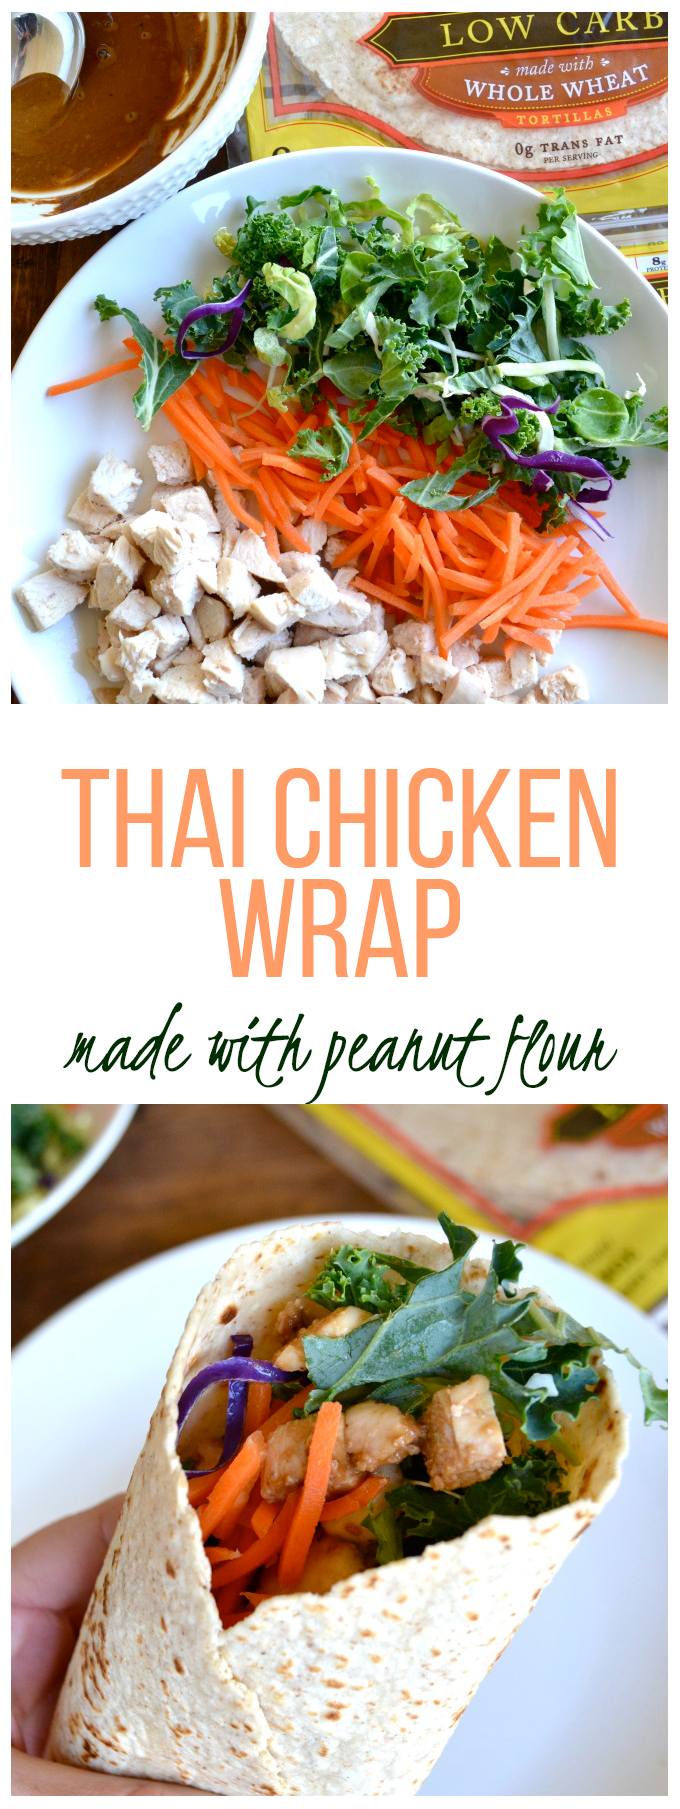 Thai Chicken Wrap - made with peanut flour and soy sauce!